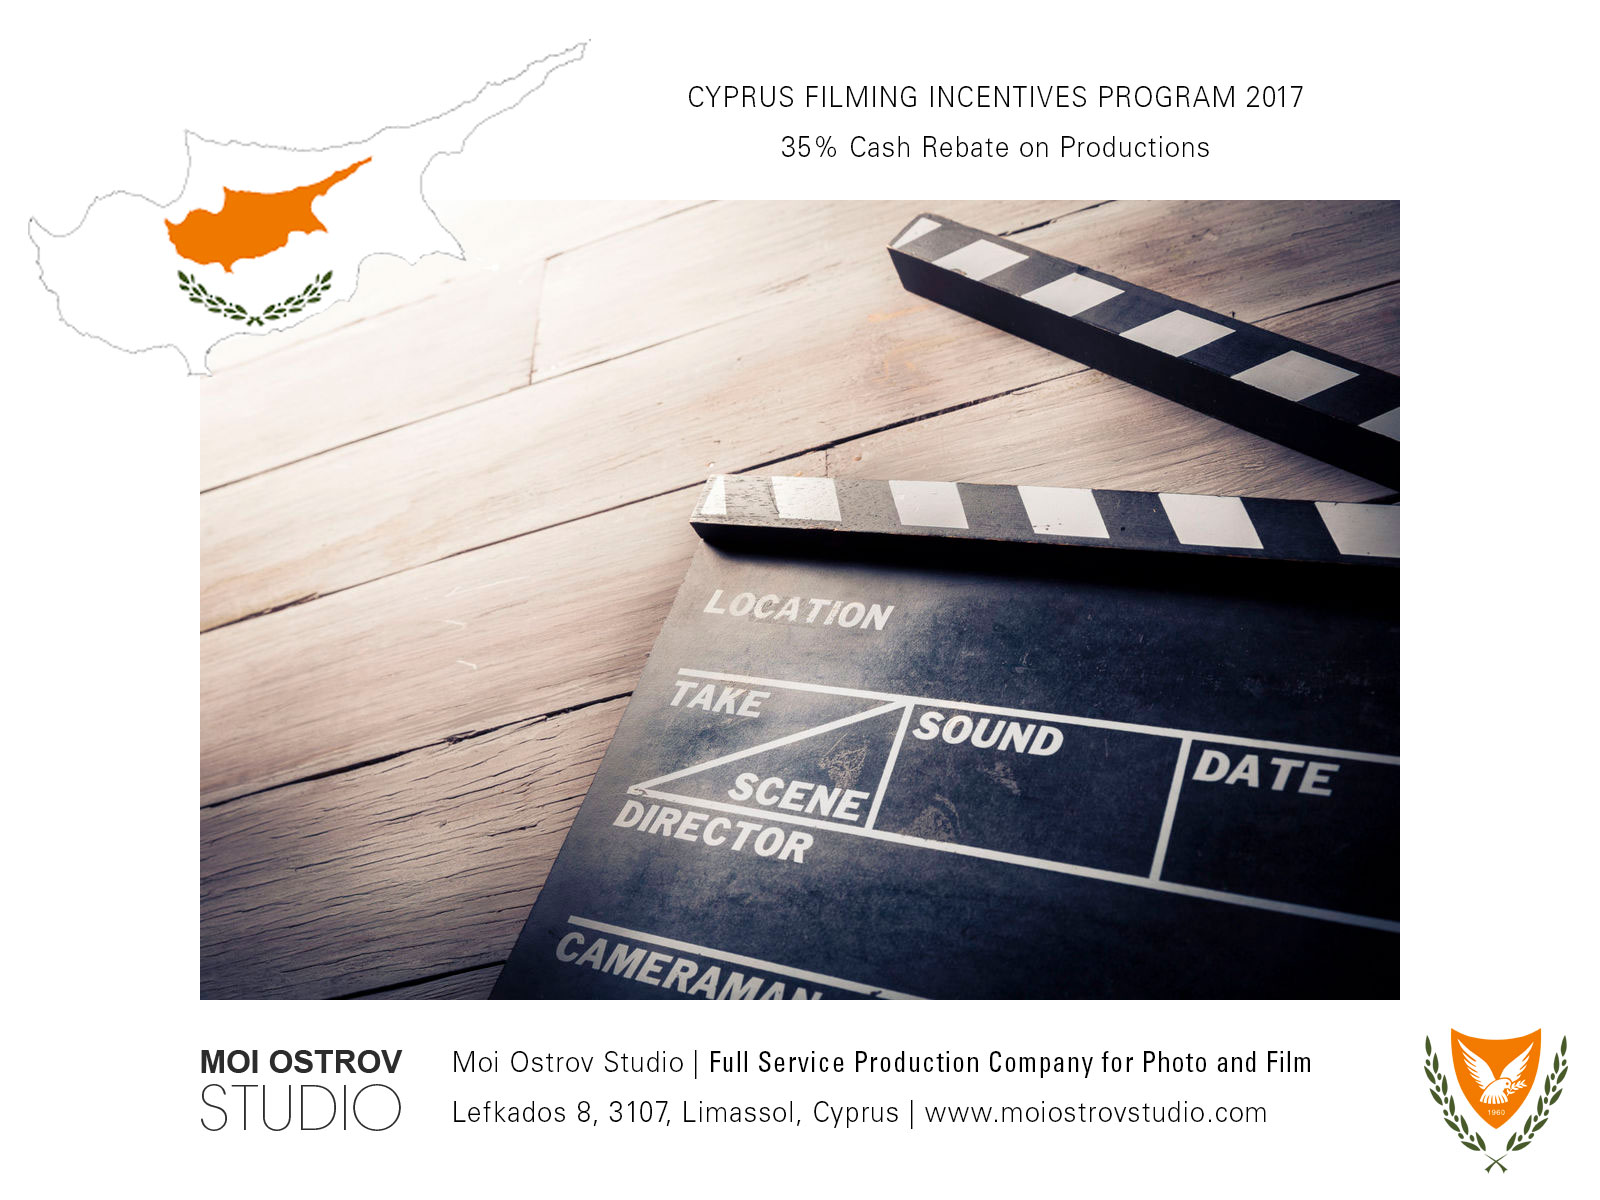 Cash incentives for filming in Cyprus